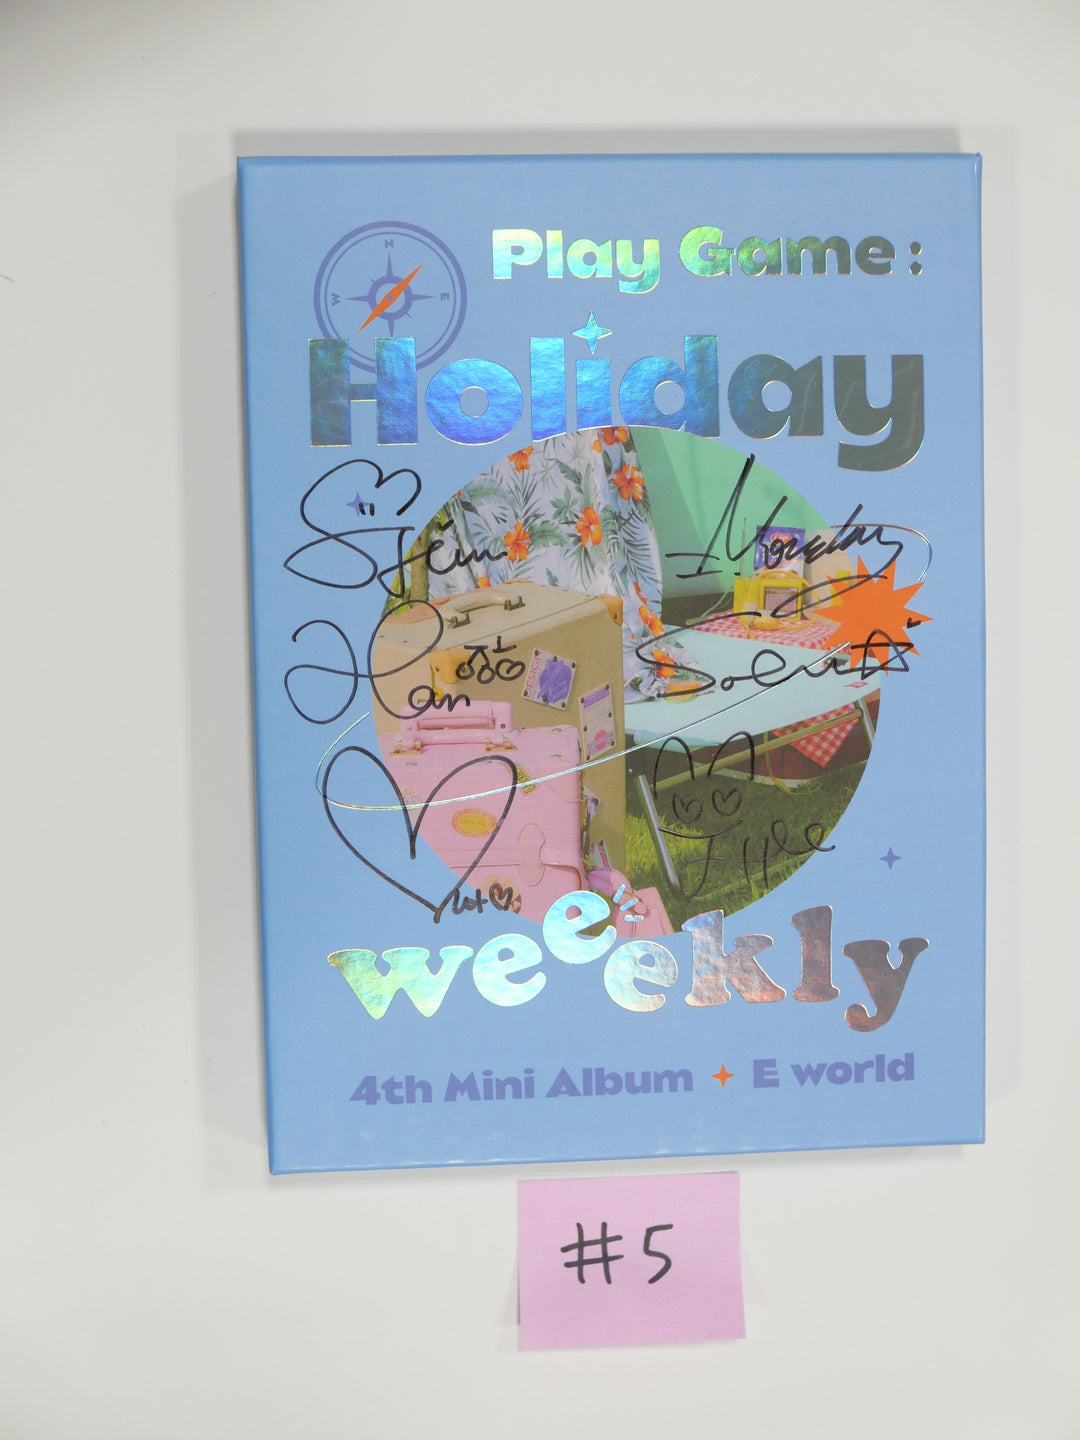 Weeekly「Play Game : Holiday Party」4th Mini - サイン入りプロモアルバム (8/12更新)